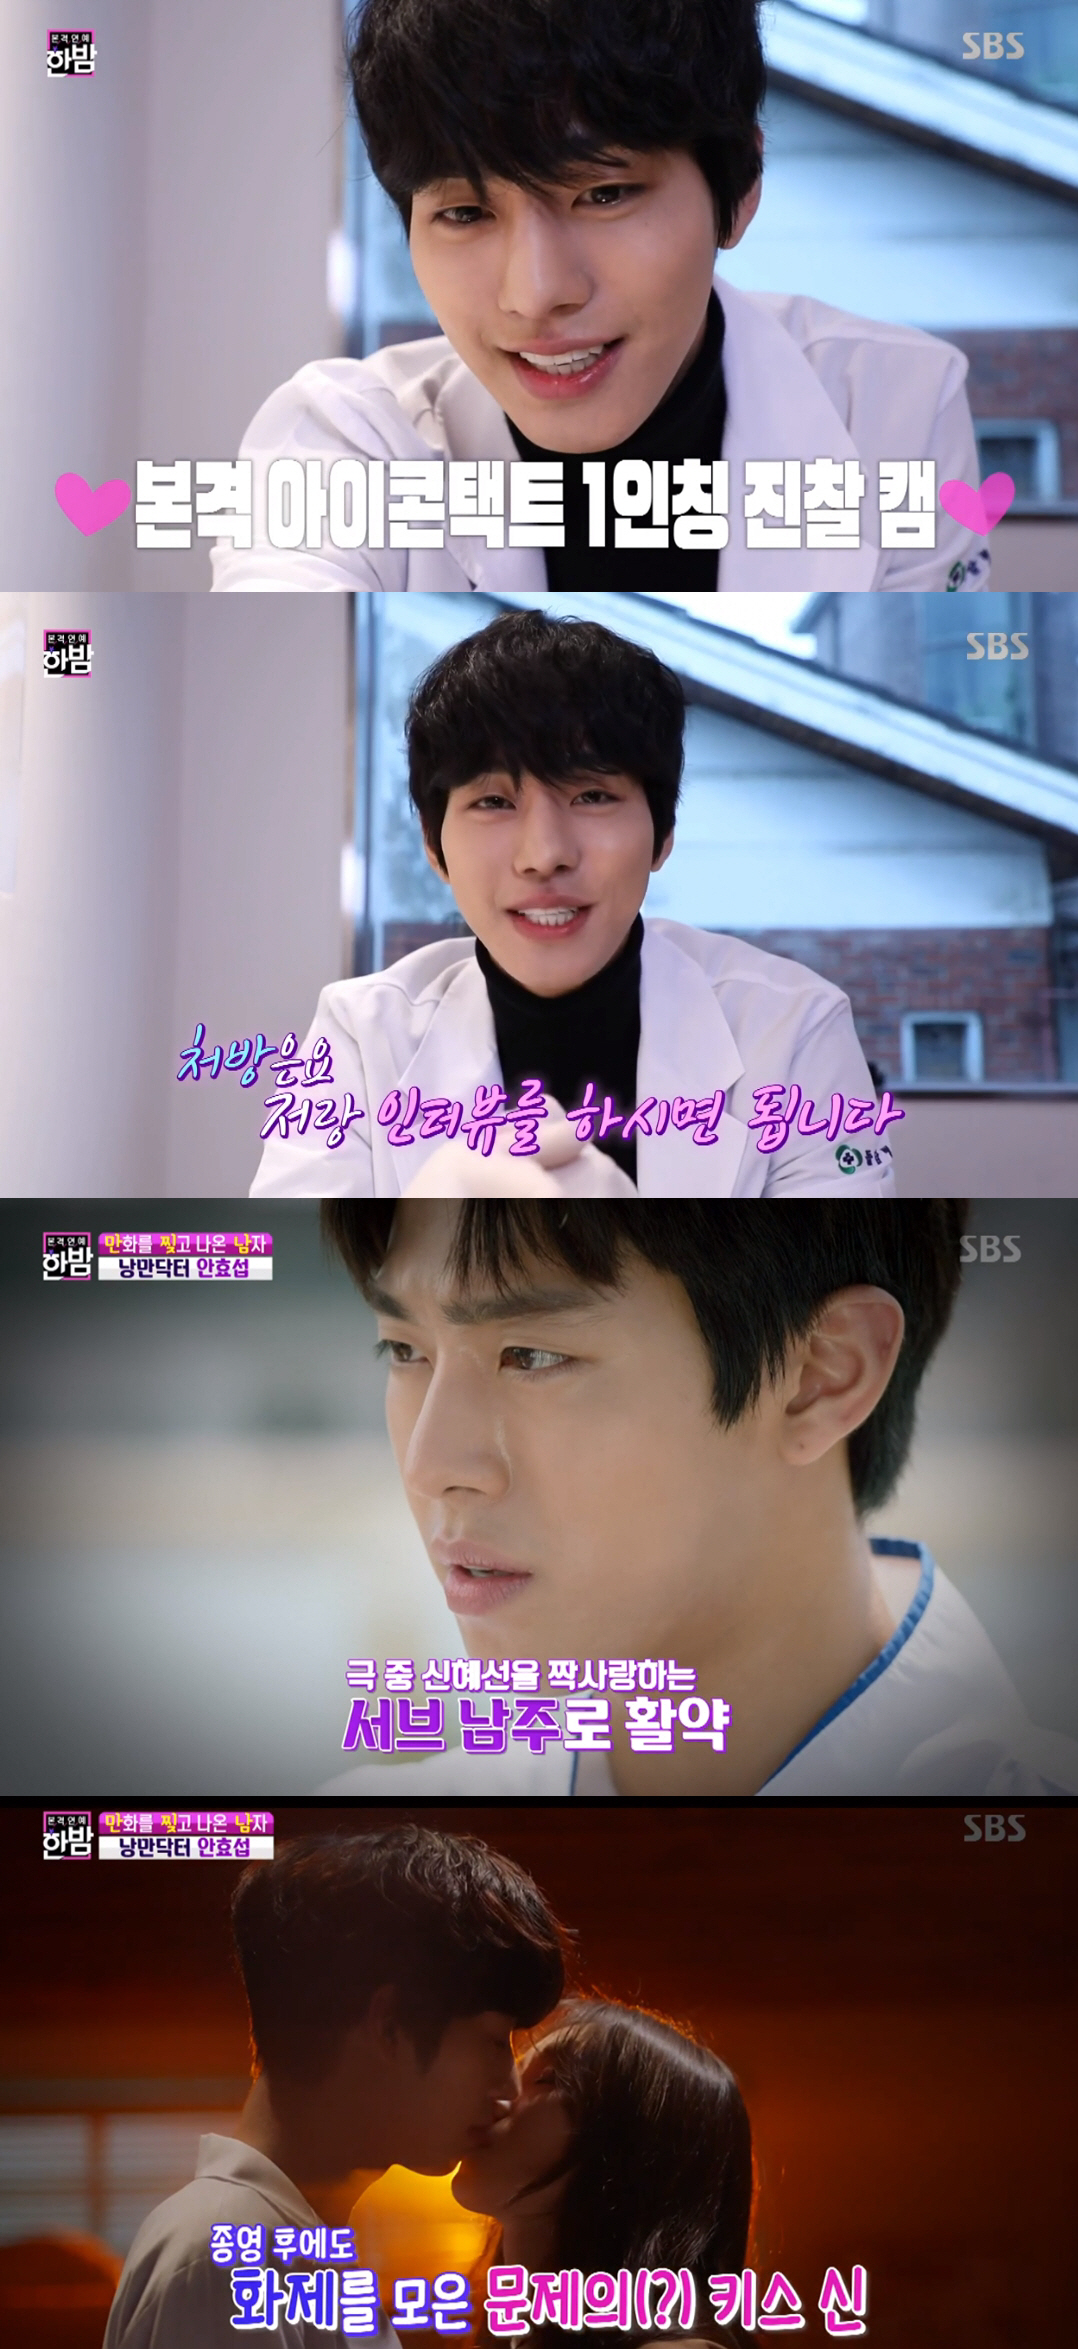 On the 4th broadcast SBS Full Entertainment Midnight, he released an interview with Ahn Hyo-seop, who played an active role in SBS Romantic Doctor Kim Sabu 2.Ahn Hyo-seop, who played a role as a living doctor who was chased by debt debts, convincingly portrayed him as a real doctor in Romantic Doctor Kim Sabu 2.Ahn Hyo-seop was ashamed of the words handsome and confessed, Its okay after getting close, but at the beginning, I cover a lot of faces.Ahn Hyo-seop, who originally said that he was a fan of Romantic Doctor Kim Sabu, said, I thought, Lets not be a public servant, lets do something that will help the drama.I thought I should put a steel plate on the last minute, but I thought I had a lot of NG in the beginning, he said.In the drama, Lee Sung-kyung, who plays the role of Cha Eun-jae, made a love line and made a wonderful kissing scene. Ahn Hyo-seop said, Kiss Shin was the last scene of the whole shooting.It was not easy to shoot in the spirit, but thanks to the wine in the coachs car, I drank one or two glasses. Fortunately, I finished shooting safely. Midnight asked Ahn Hyo-seop to demonstrate surgery on the spot. Ahn Hyo-seop was able to take the medical tools used in the actual play and attracted attention with his unusual skill.As for the role I want to challenge, I still have a lot of things. I want to do everything. I want to be an actor who is always willing to learn.The actor is learning, he said.